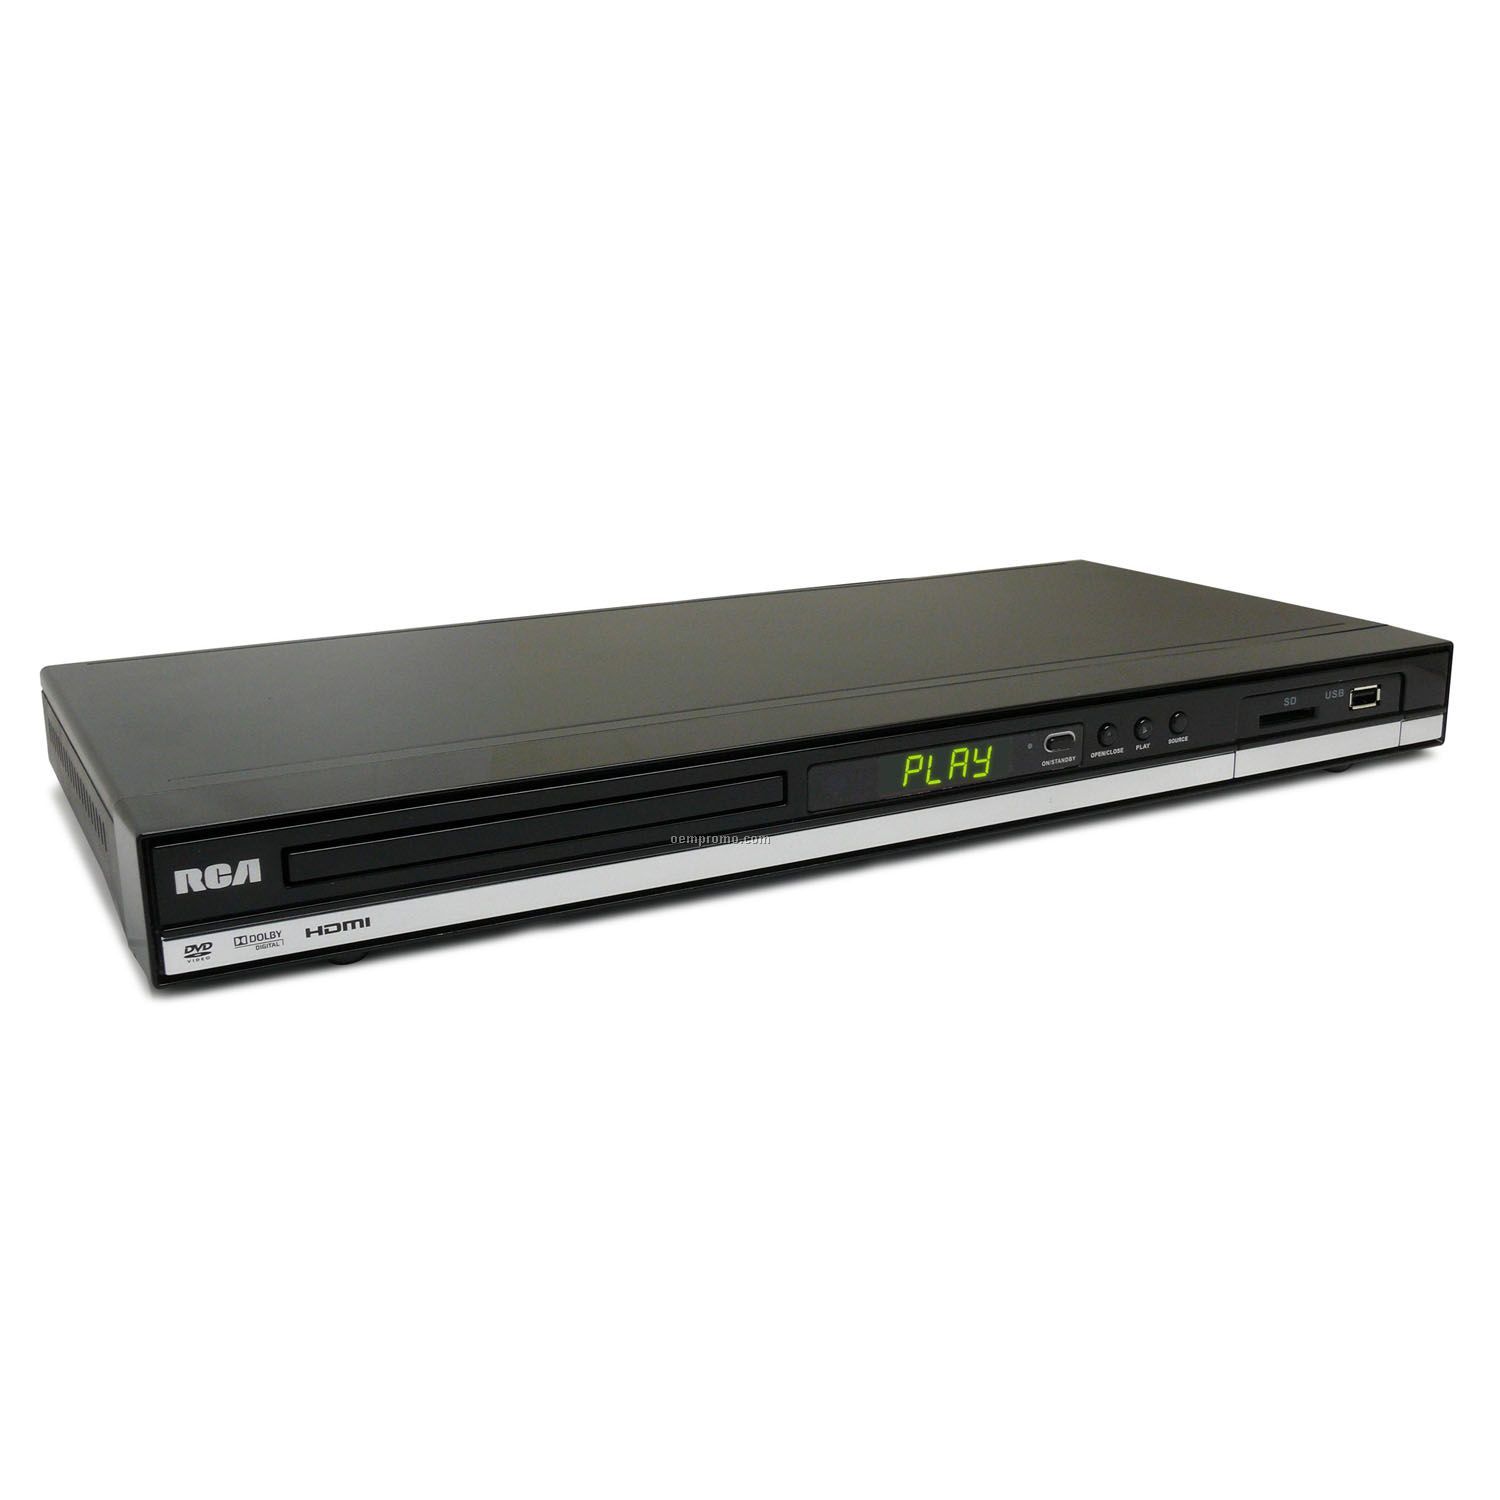 Rca Upconverting DVD Player With Sd Slot And USB Port